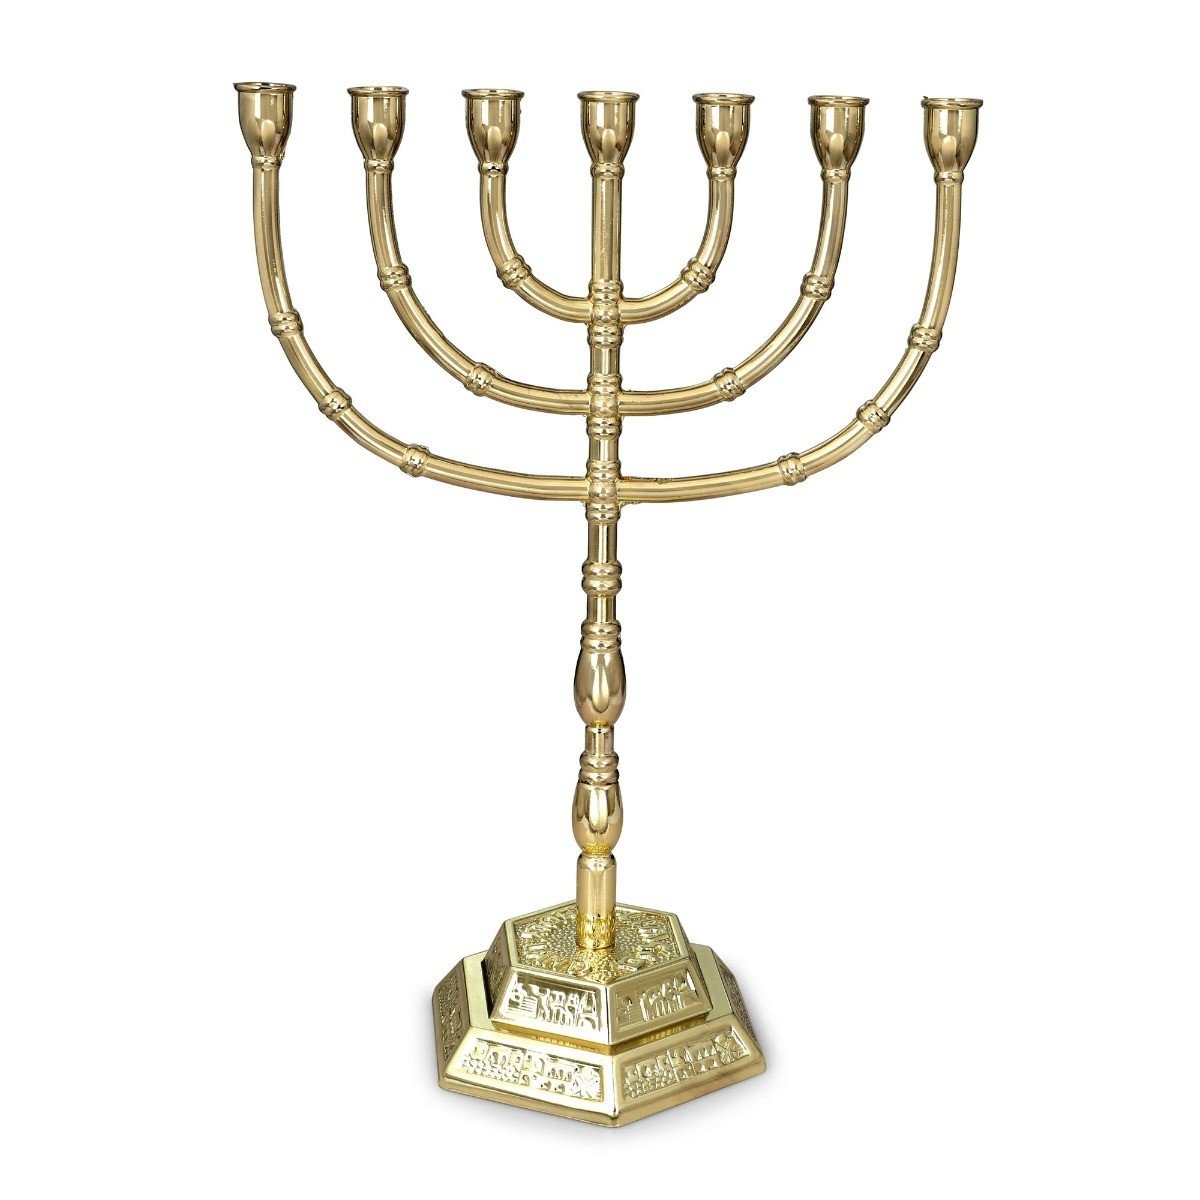 Traditional Seven Branch Menorah (Variety of Colors) - 1